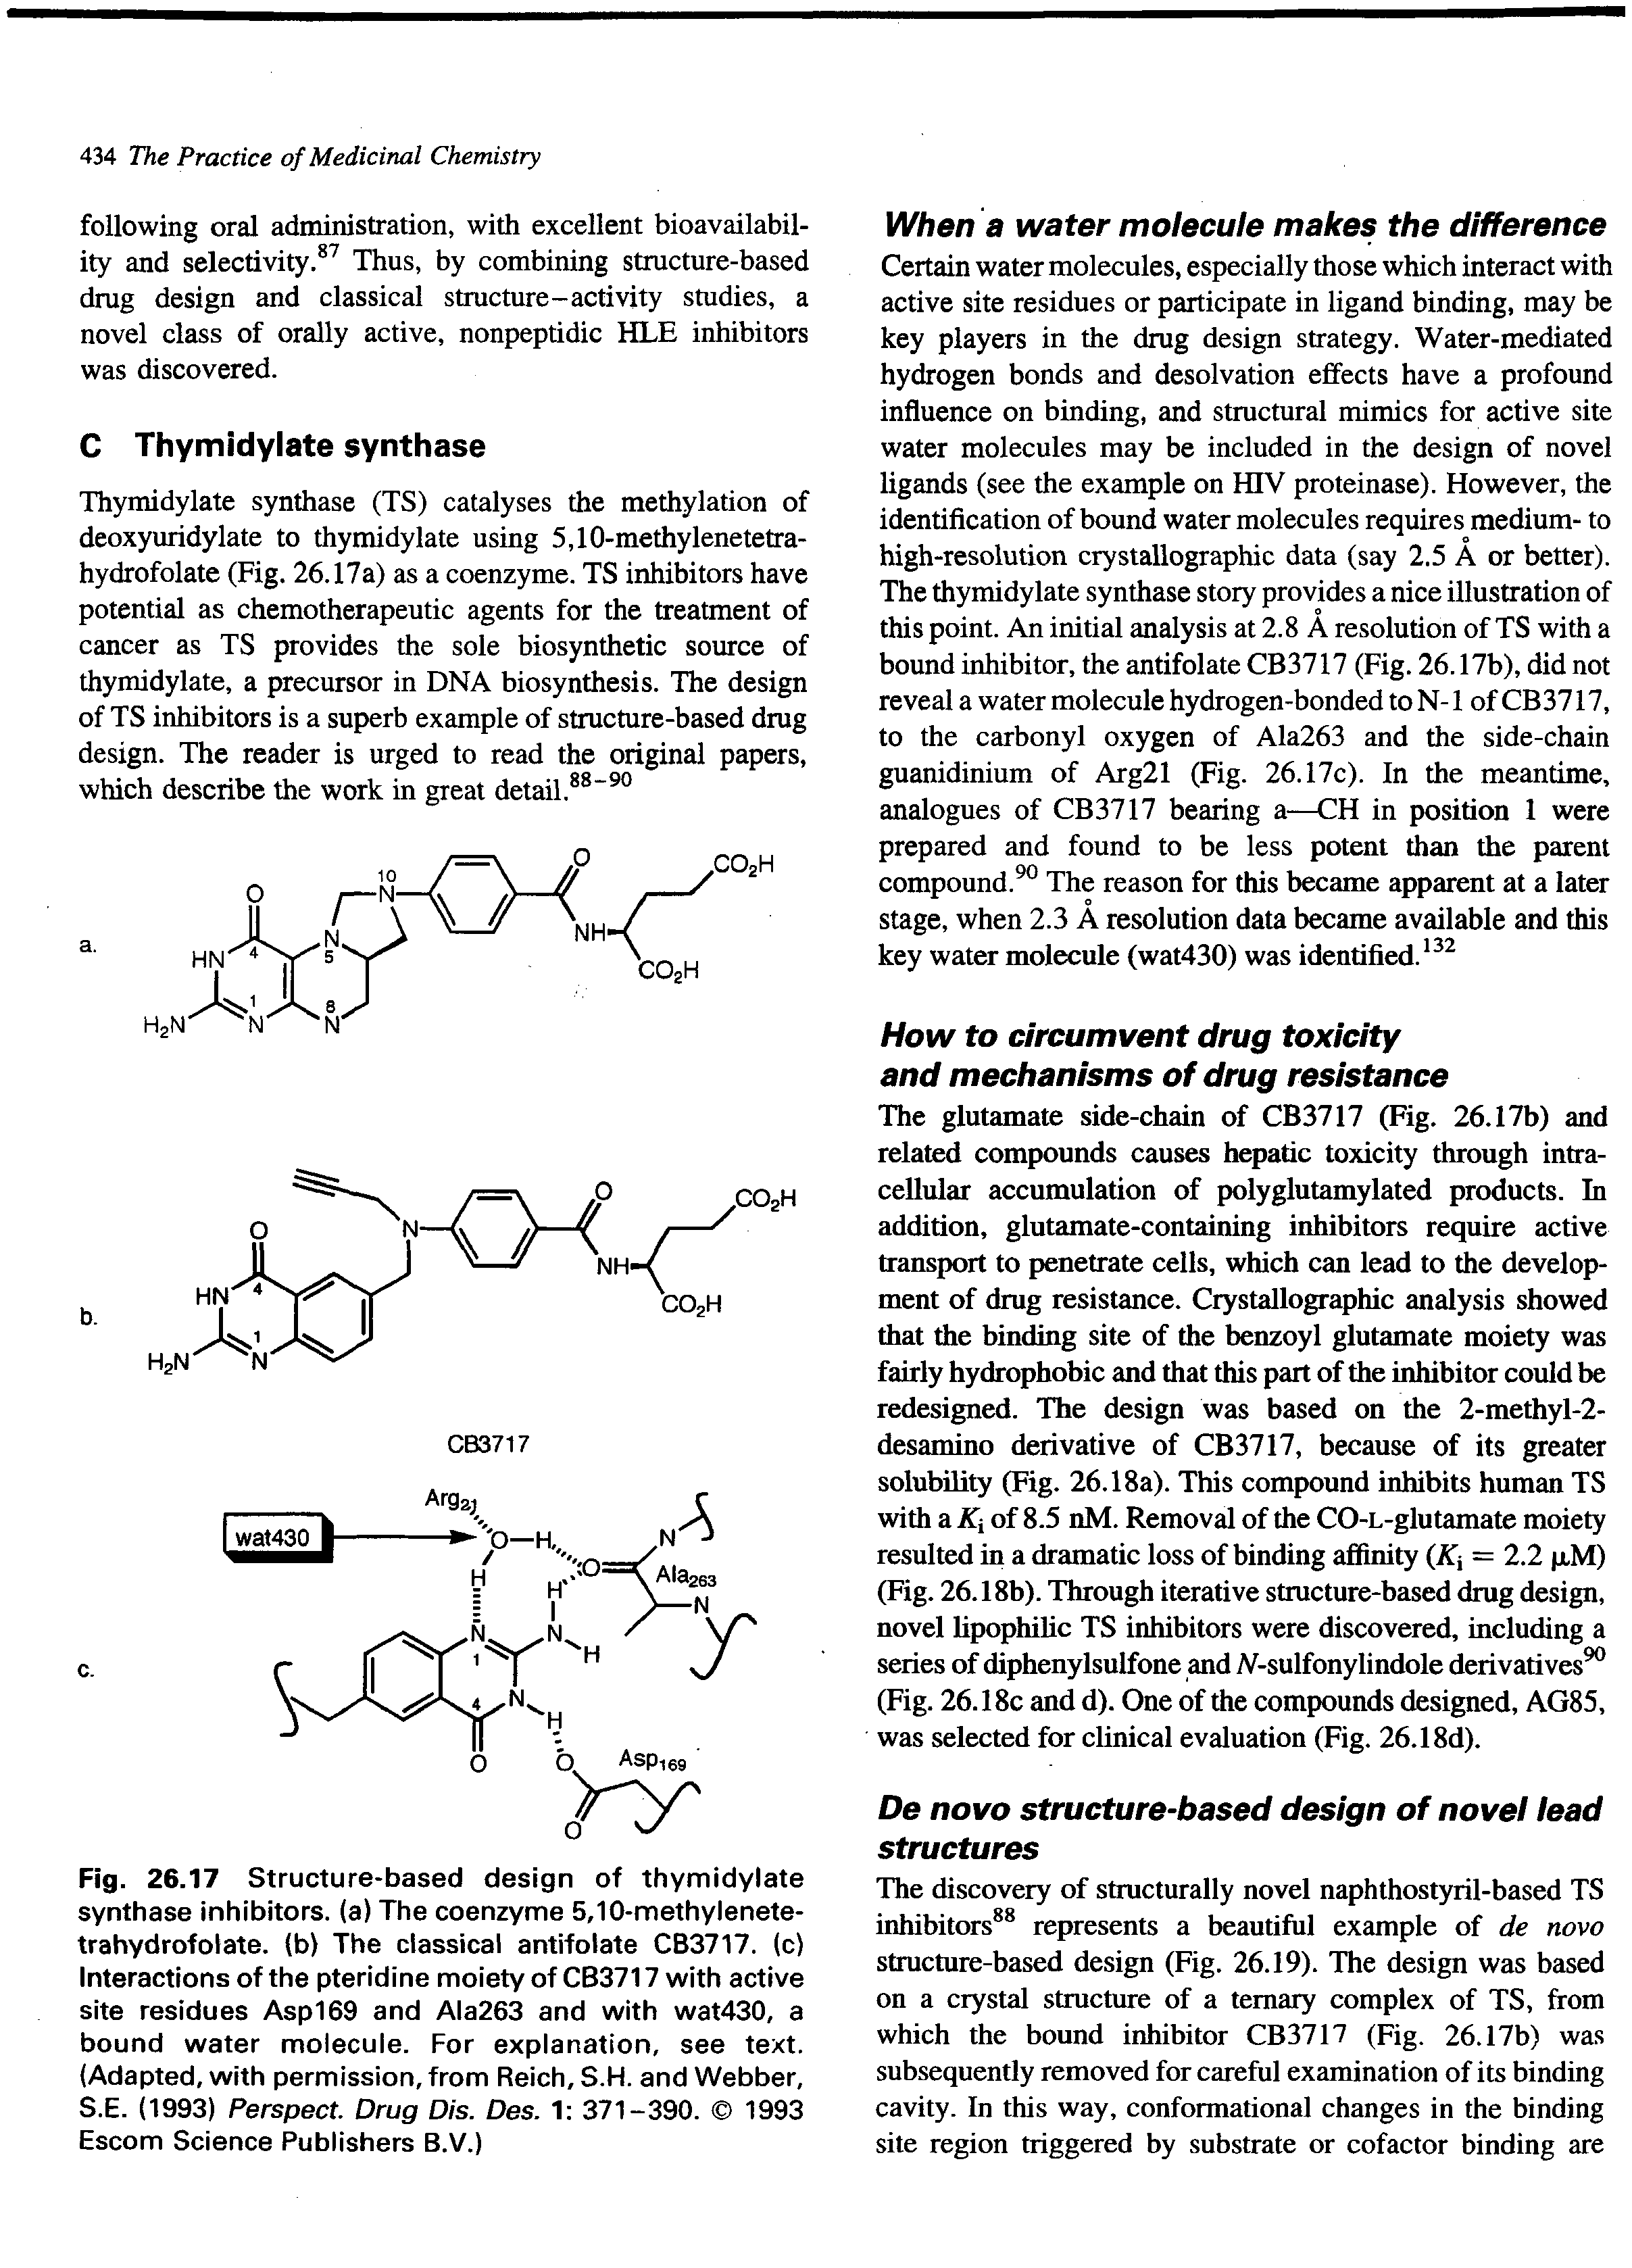 Fig. 26.17 Structure-based design of thymidylate synthase inhibitors, (a) The coenzyme 5,10-methylenete-trahydrofotate. (b) The classical antifolate CB3717. (c) Interactions of the pteridine moiety of CB3717 with active site residues Asp169 and Ala263 and with wat430, a bound water molecule. For explanation, see text. (Adapted, with permission, from Reich, S.H. and Webber, S.E. (1993) Perspect. Drug Dis. Des. 1 371-390. 1993 Escom Science Publishers B.V.)...